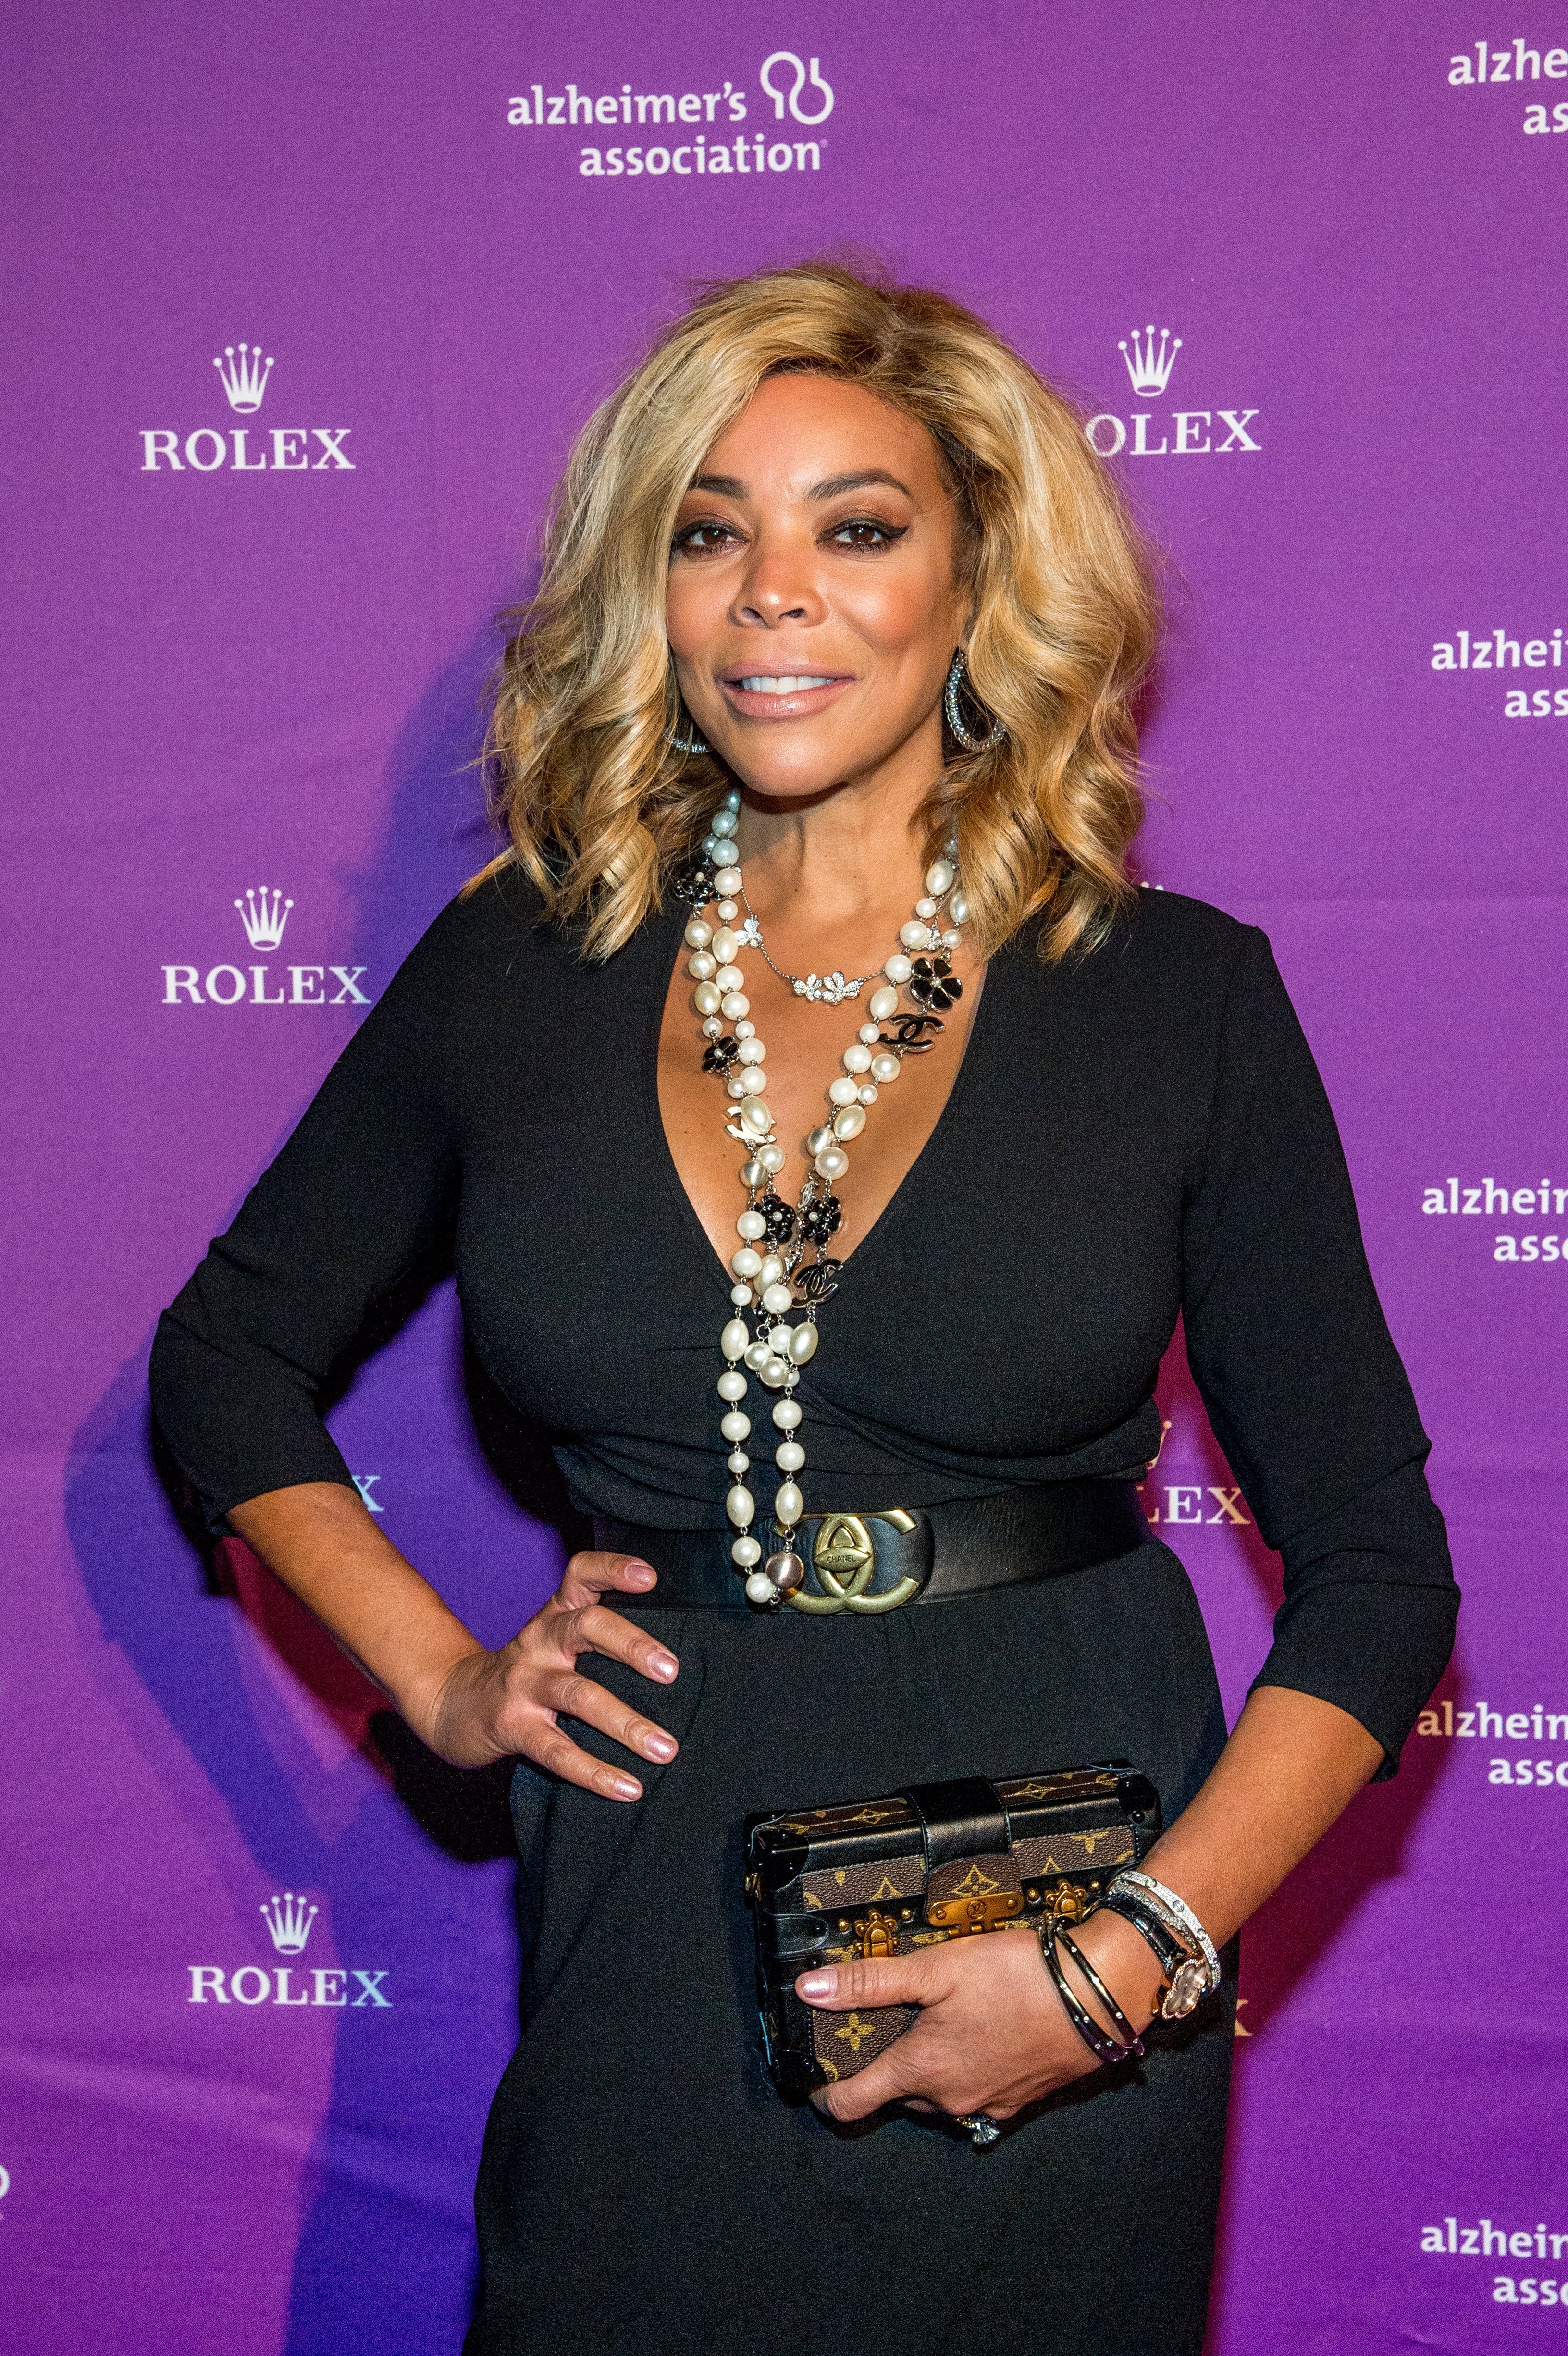 Wendy Williams attending the 33rd Annual Alzheimer's Association Rita Hayworth Gala in October 2016. | Photo: Getty Images